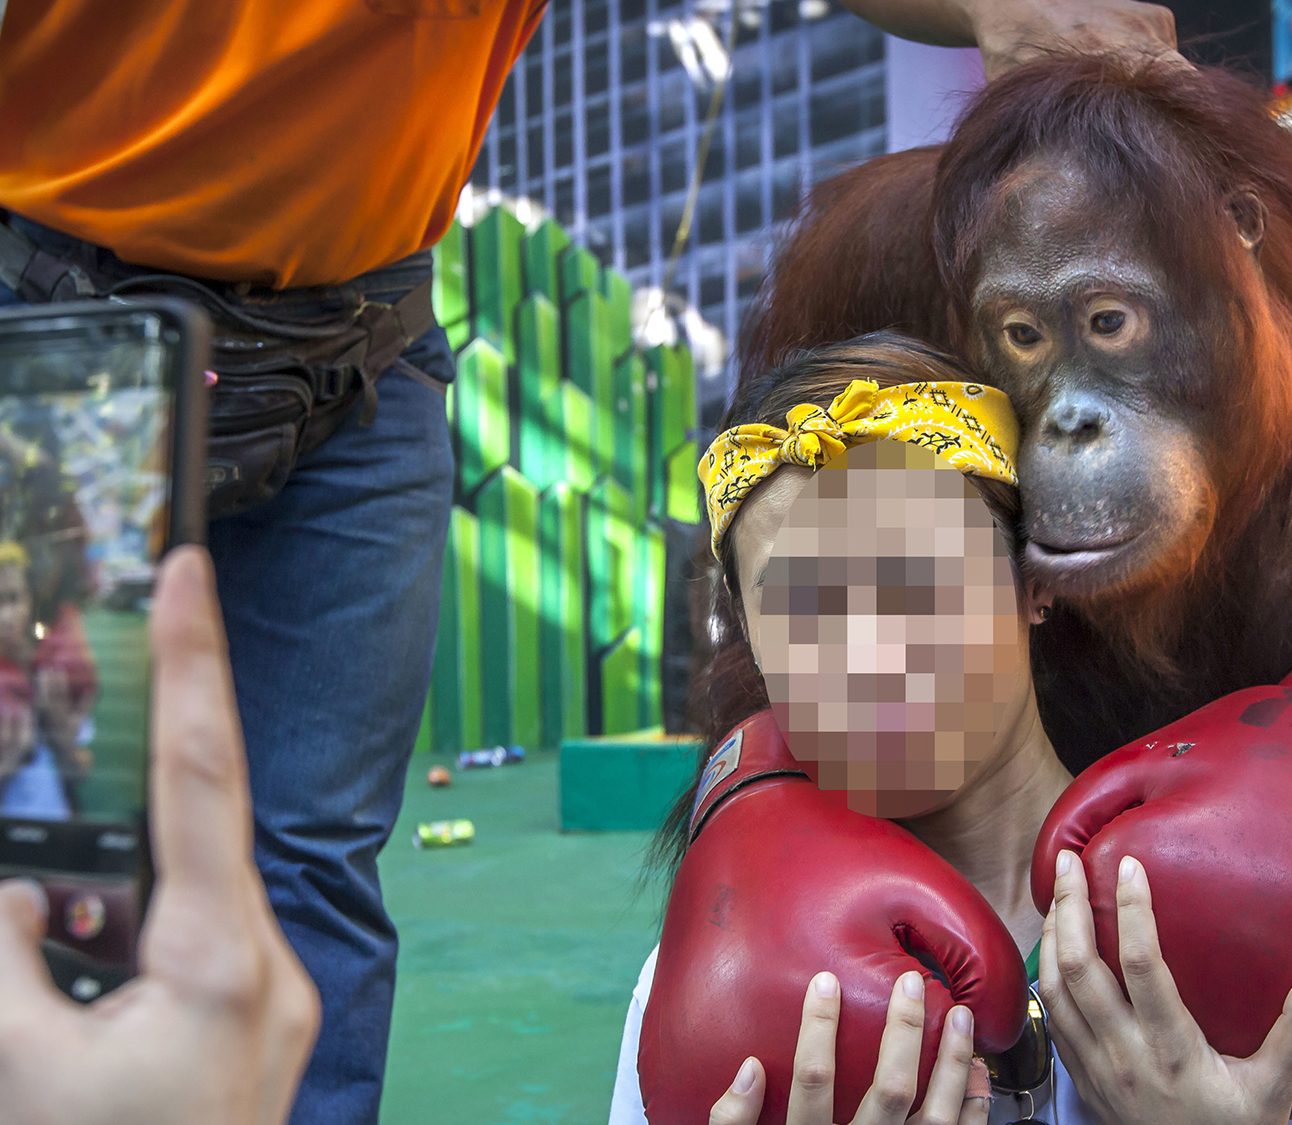 A photo of a tourist with face blurred out. There is an orangutan wearing boxing gloves resting on her shoulder